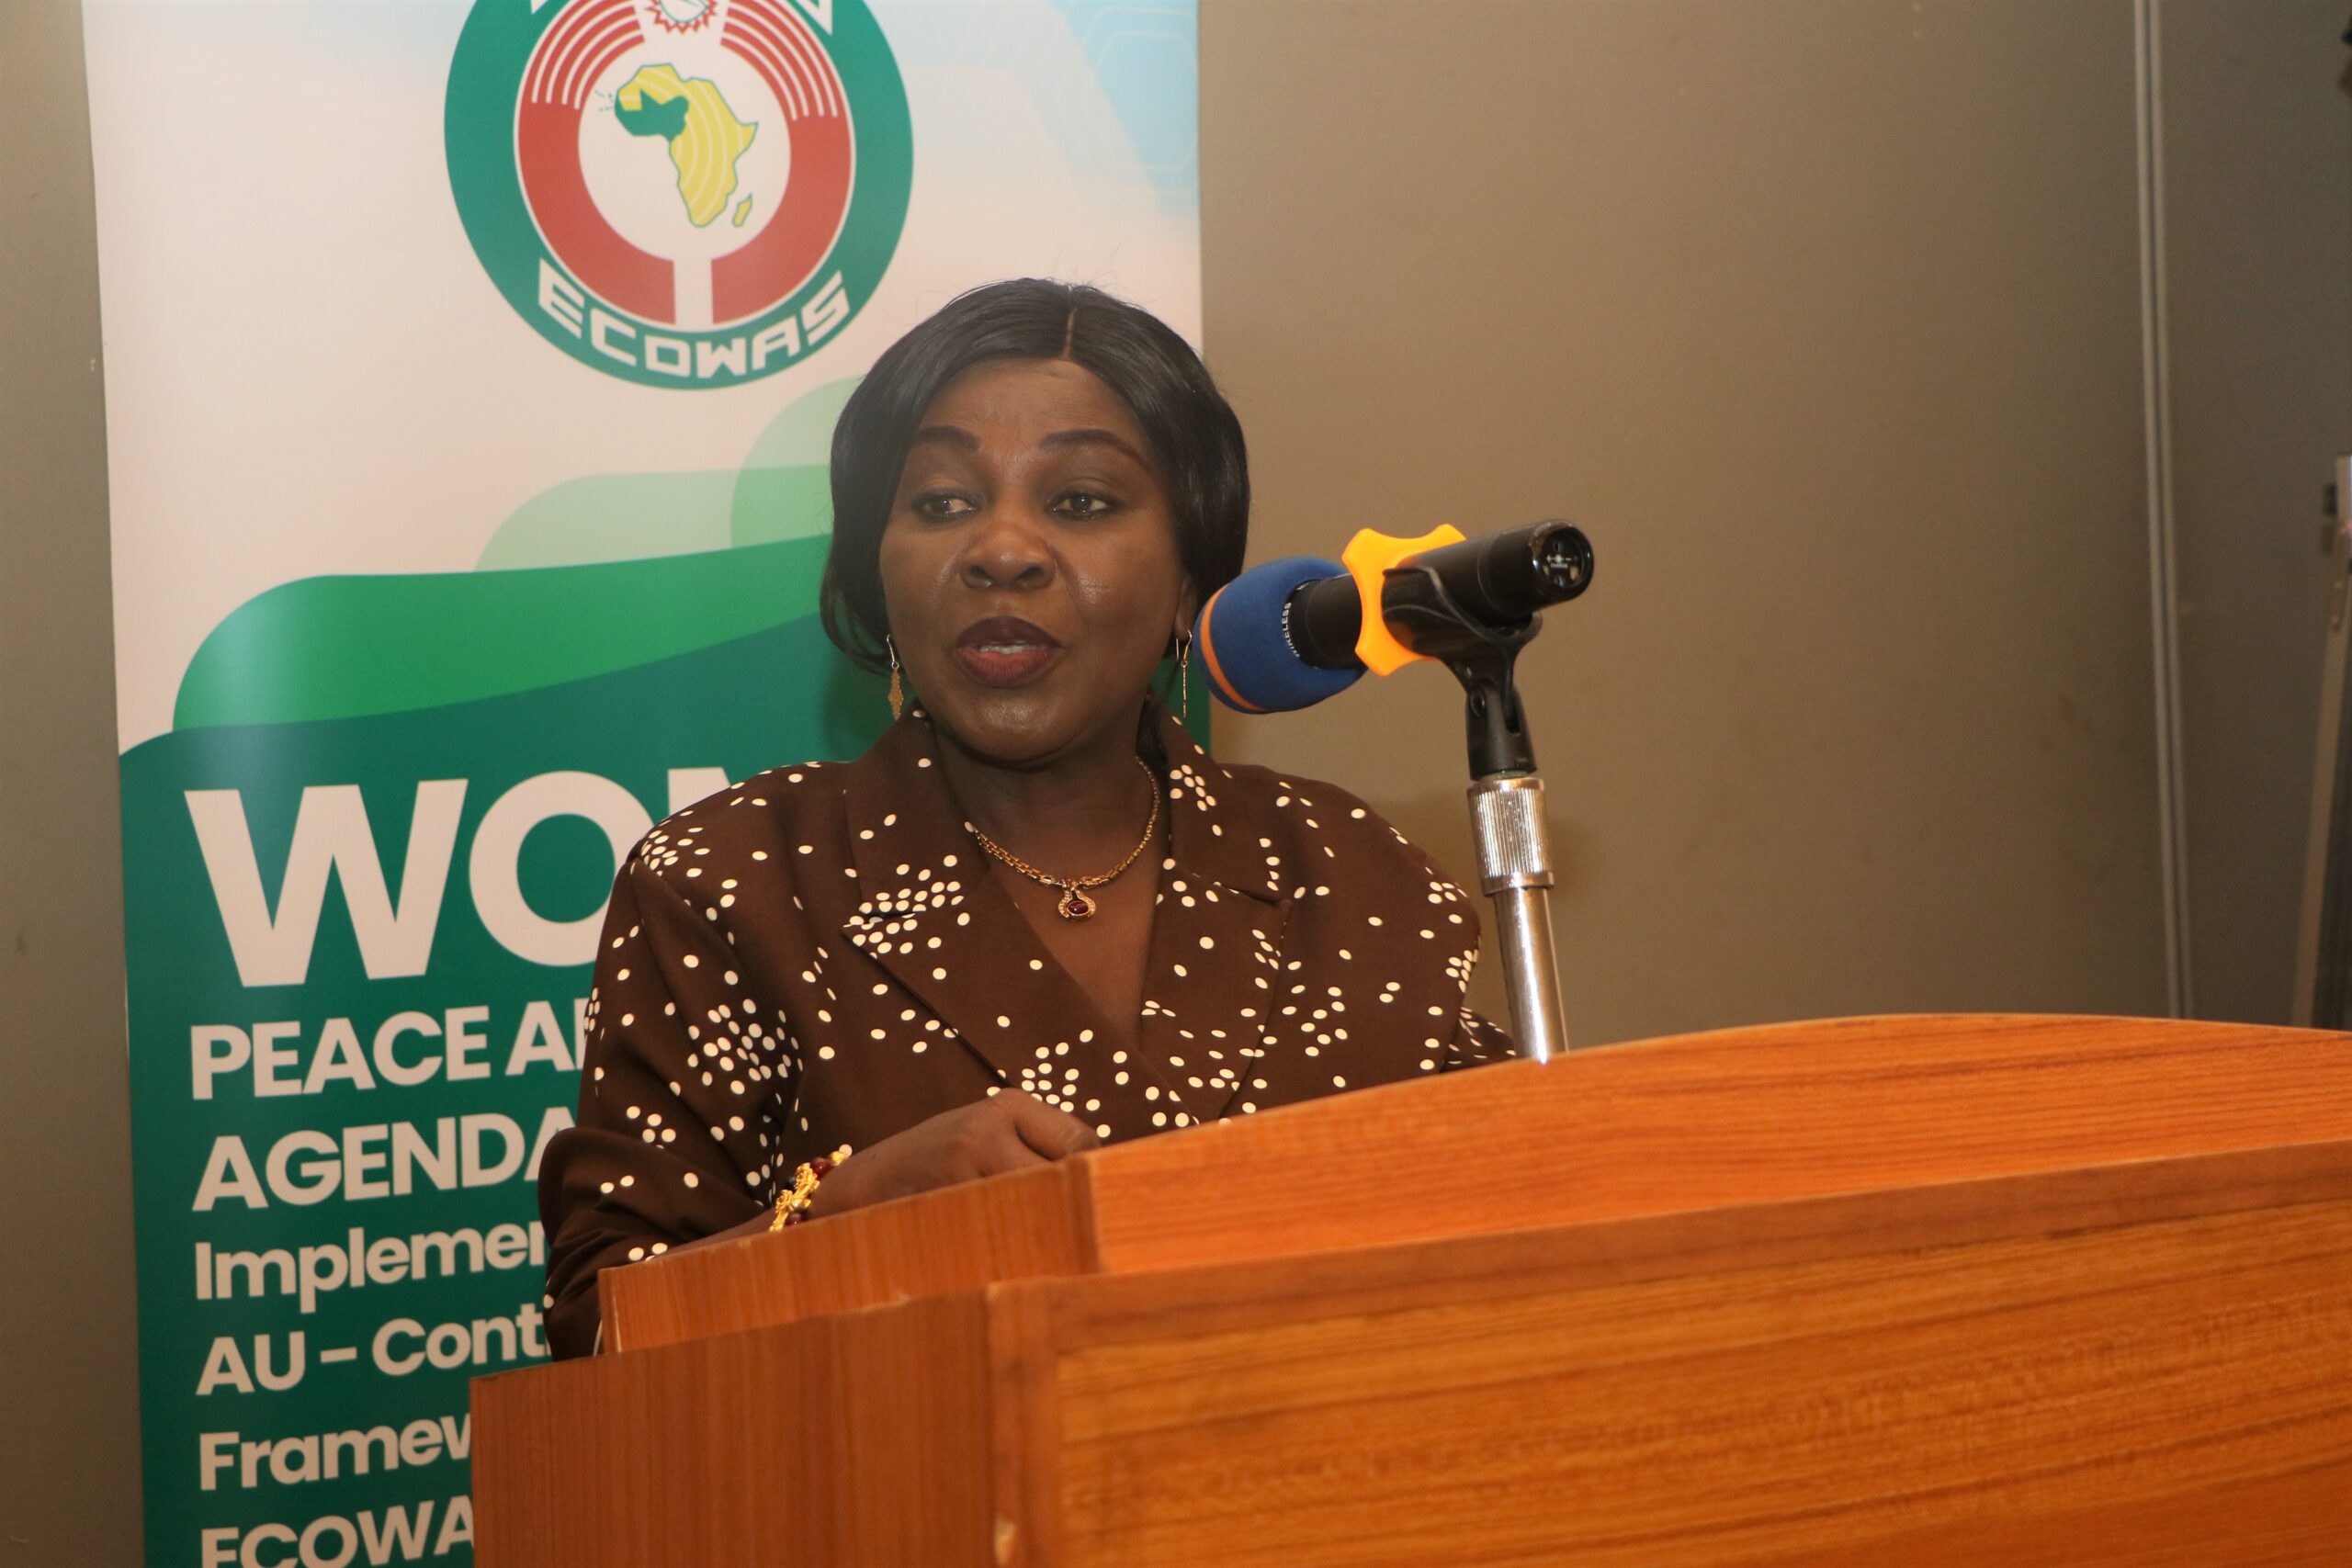 ECOWAS, UNDP Organize Training Workshop on Rollout and Implementation of AU Continental Results Framework on Women, Peace and Security